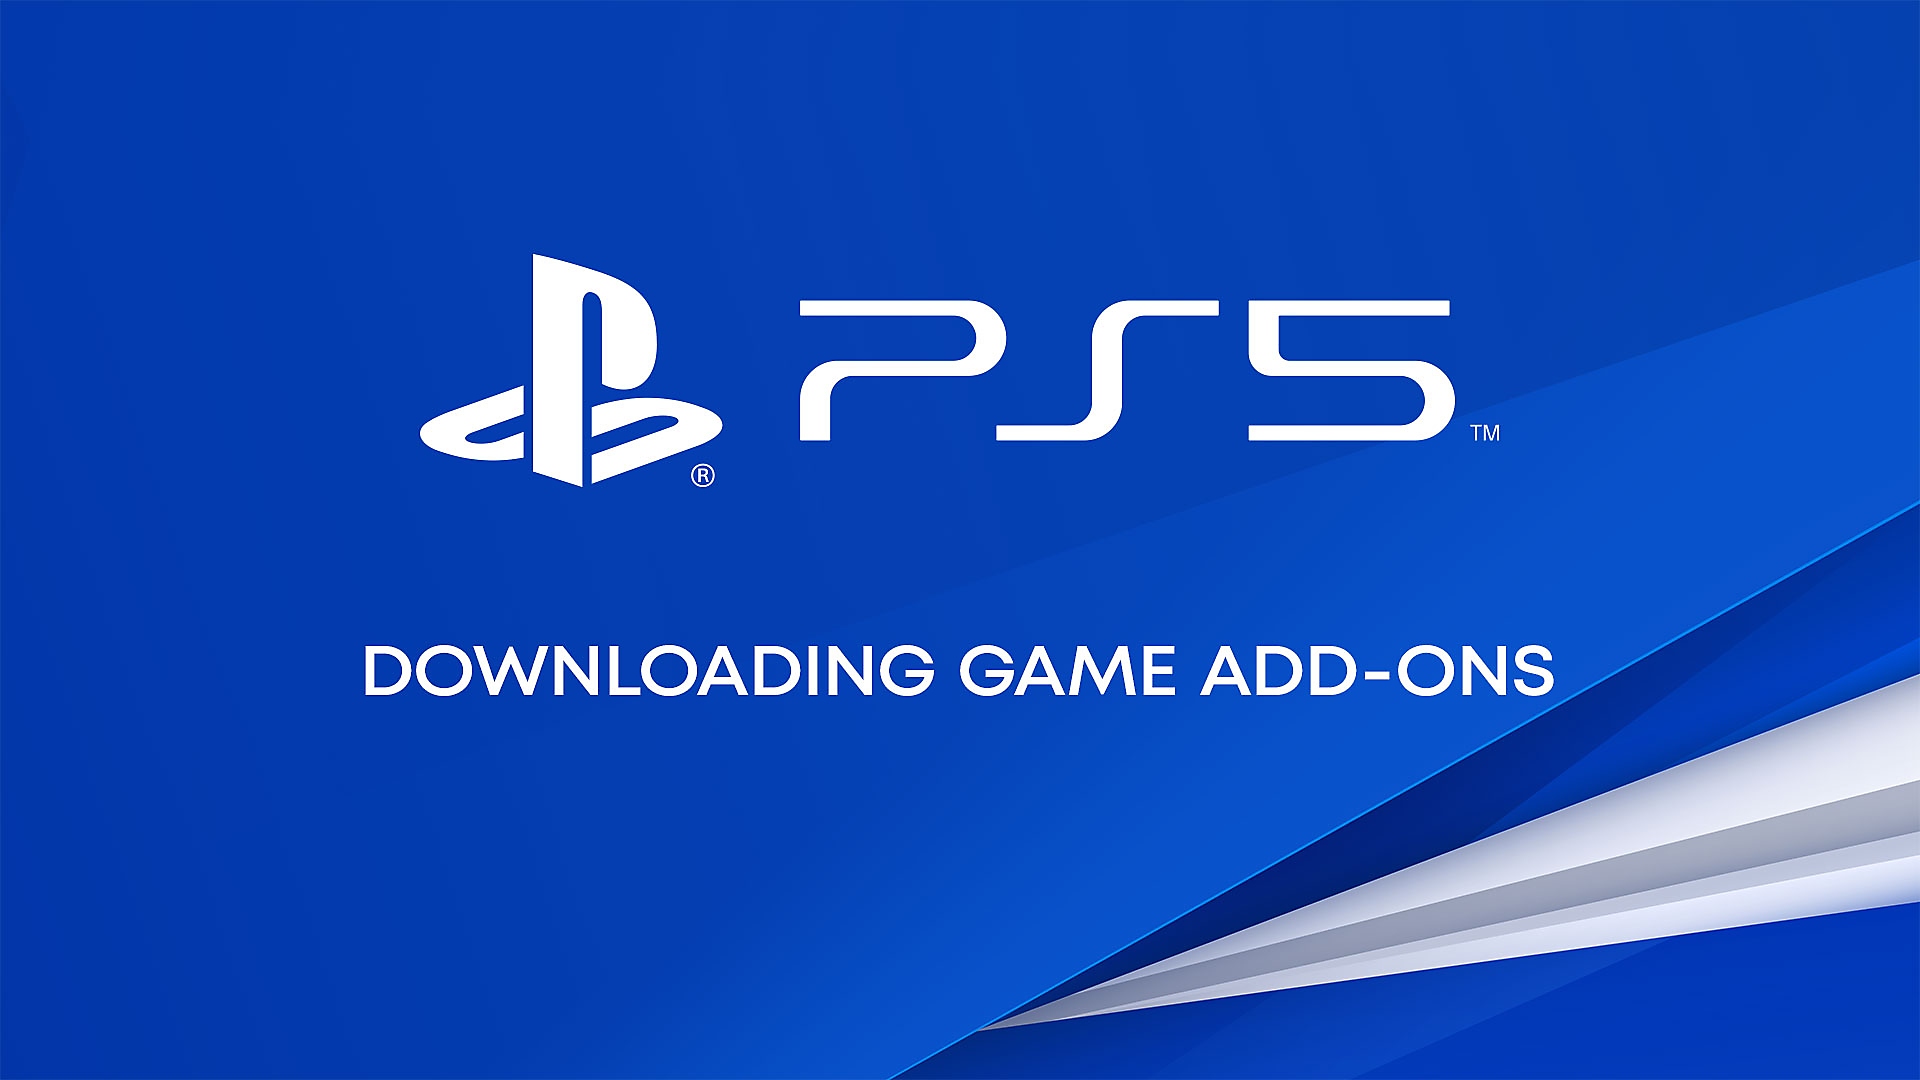 How to download add-ons on your PS5 console